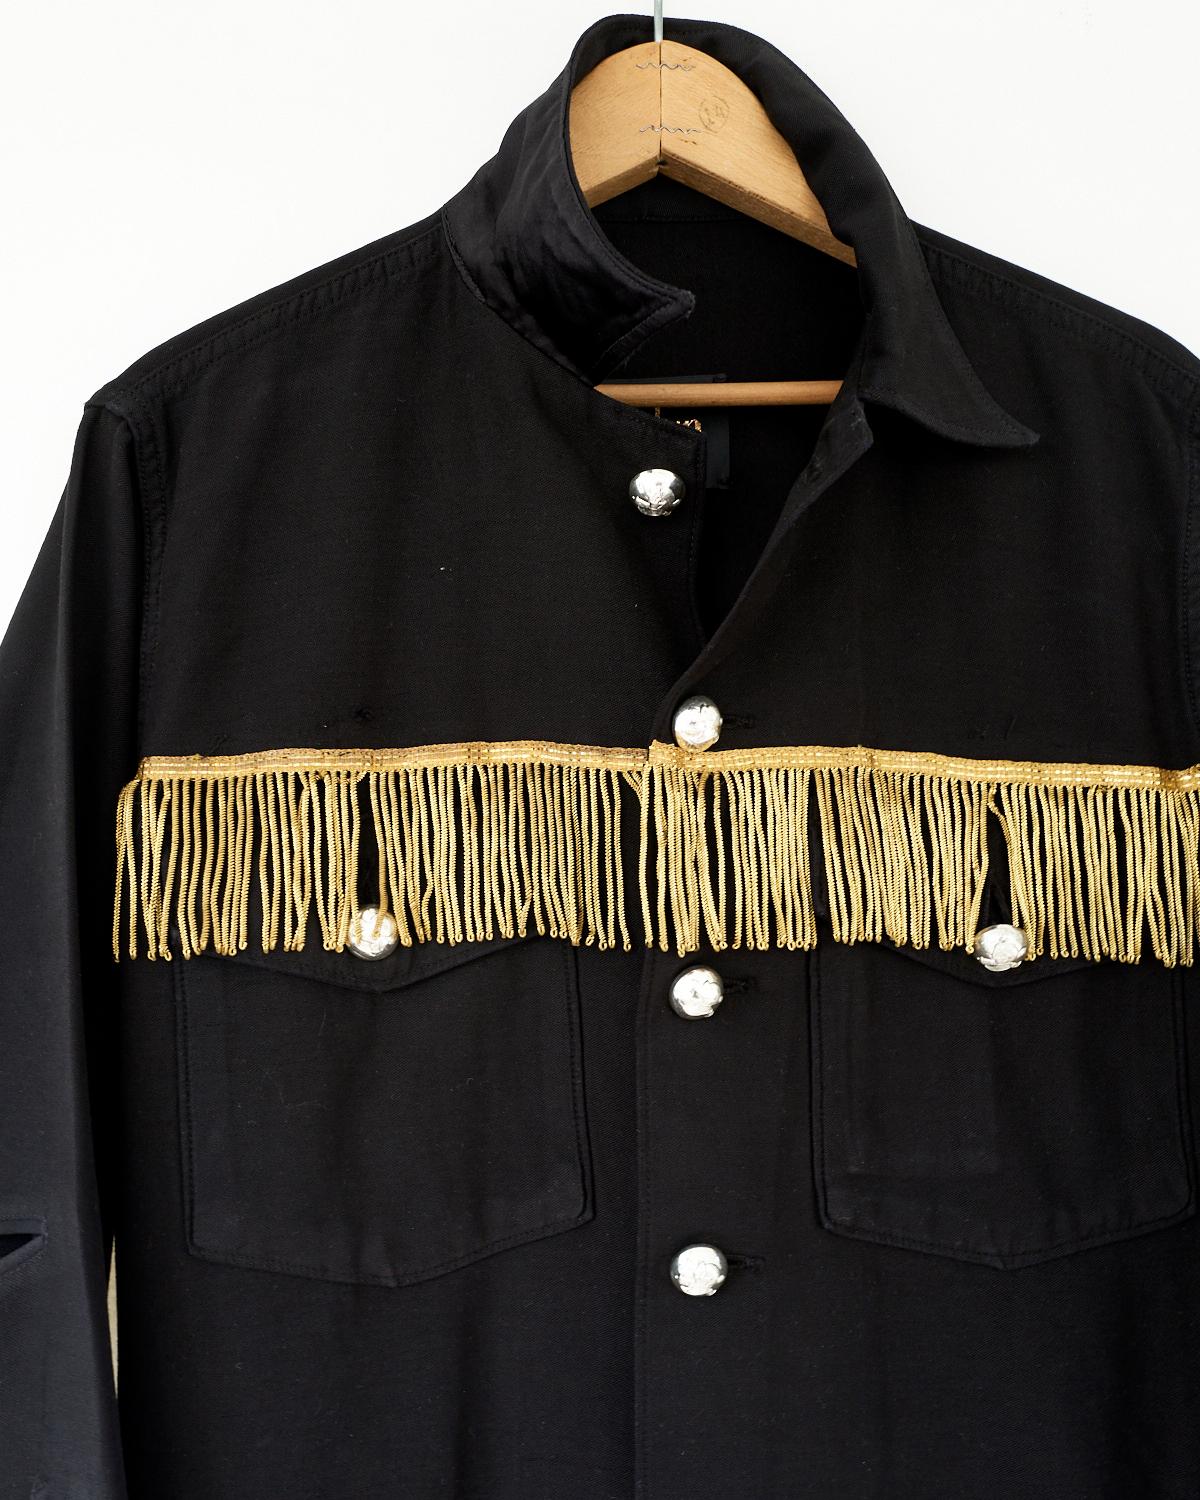 Embellished Oversize French Vintage Gold Fringes Jacket Black Military 100% Cotton Silver Button Black Duchesse Silk Reinforcements, Open Elbow.
Brand: J Dauphin
Size: S/M
Sustainable Luxury, Collectible Vintage Upcycled and Re-purposed

Our one of